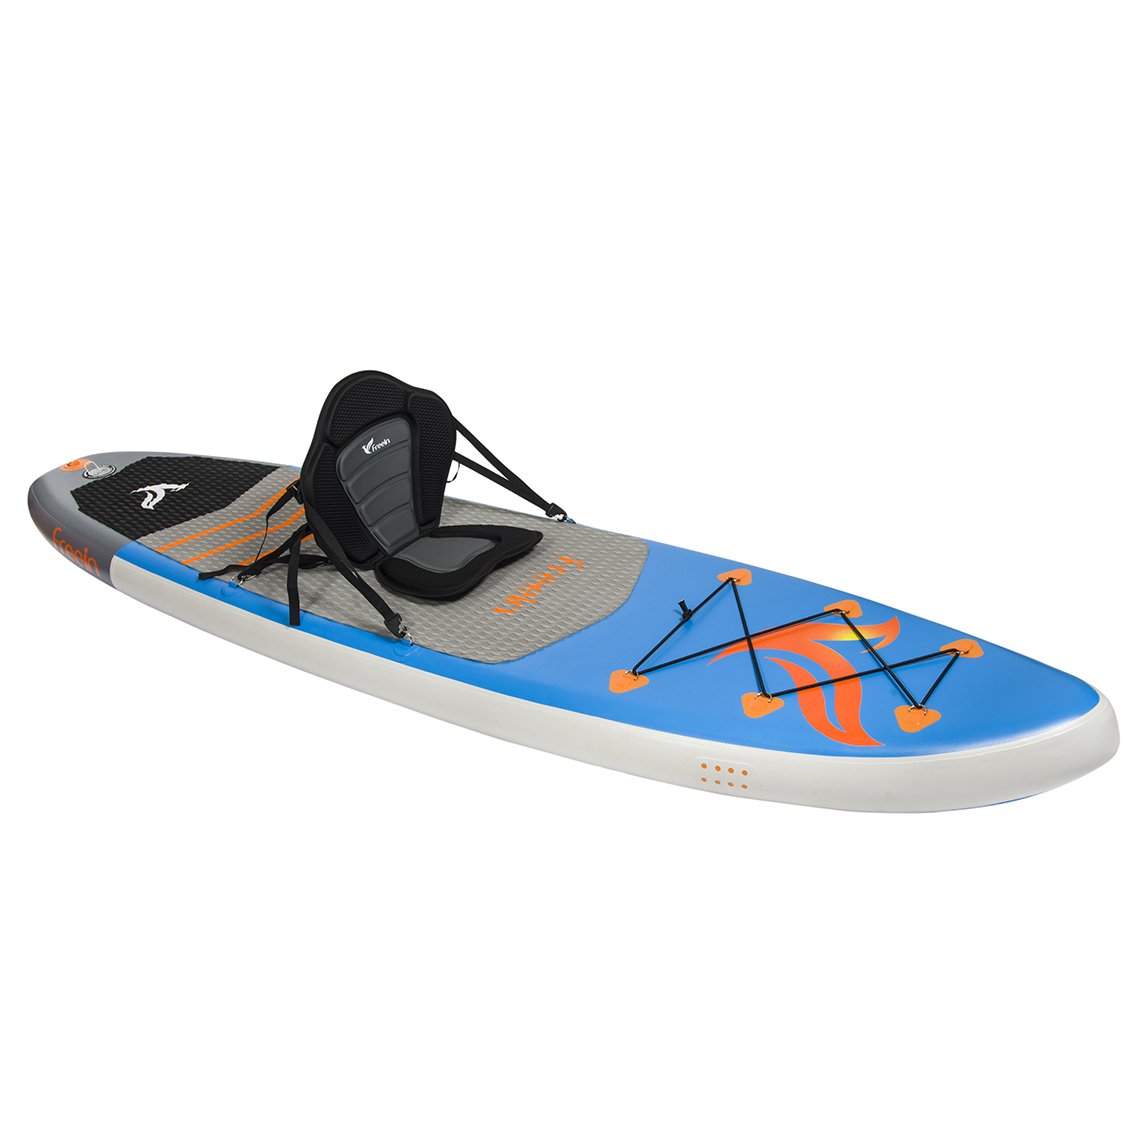 Freein Detachable Kayak Seat | Inflatable Stand Up Kayak Seat | Removable Paddle Board Seat